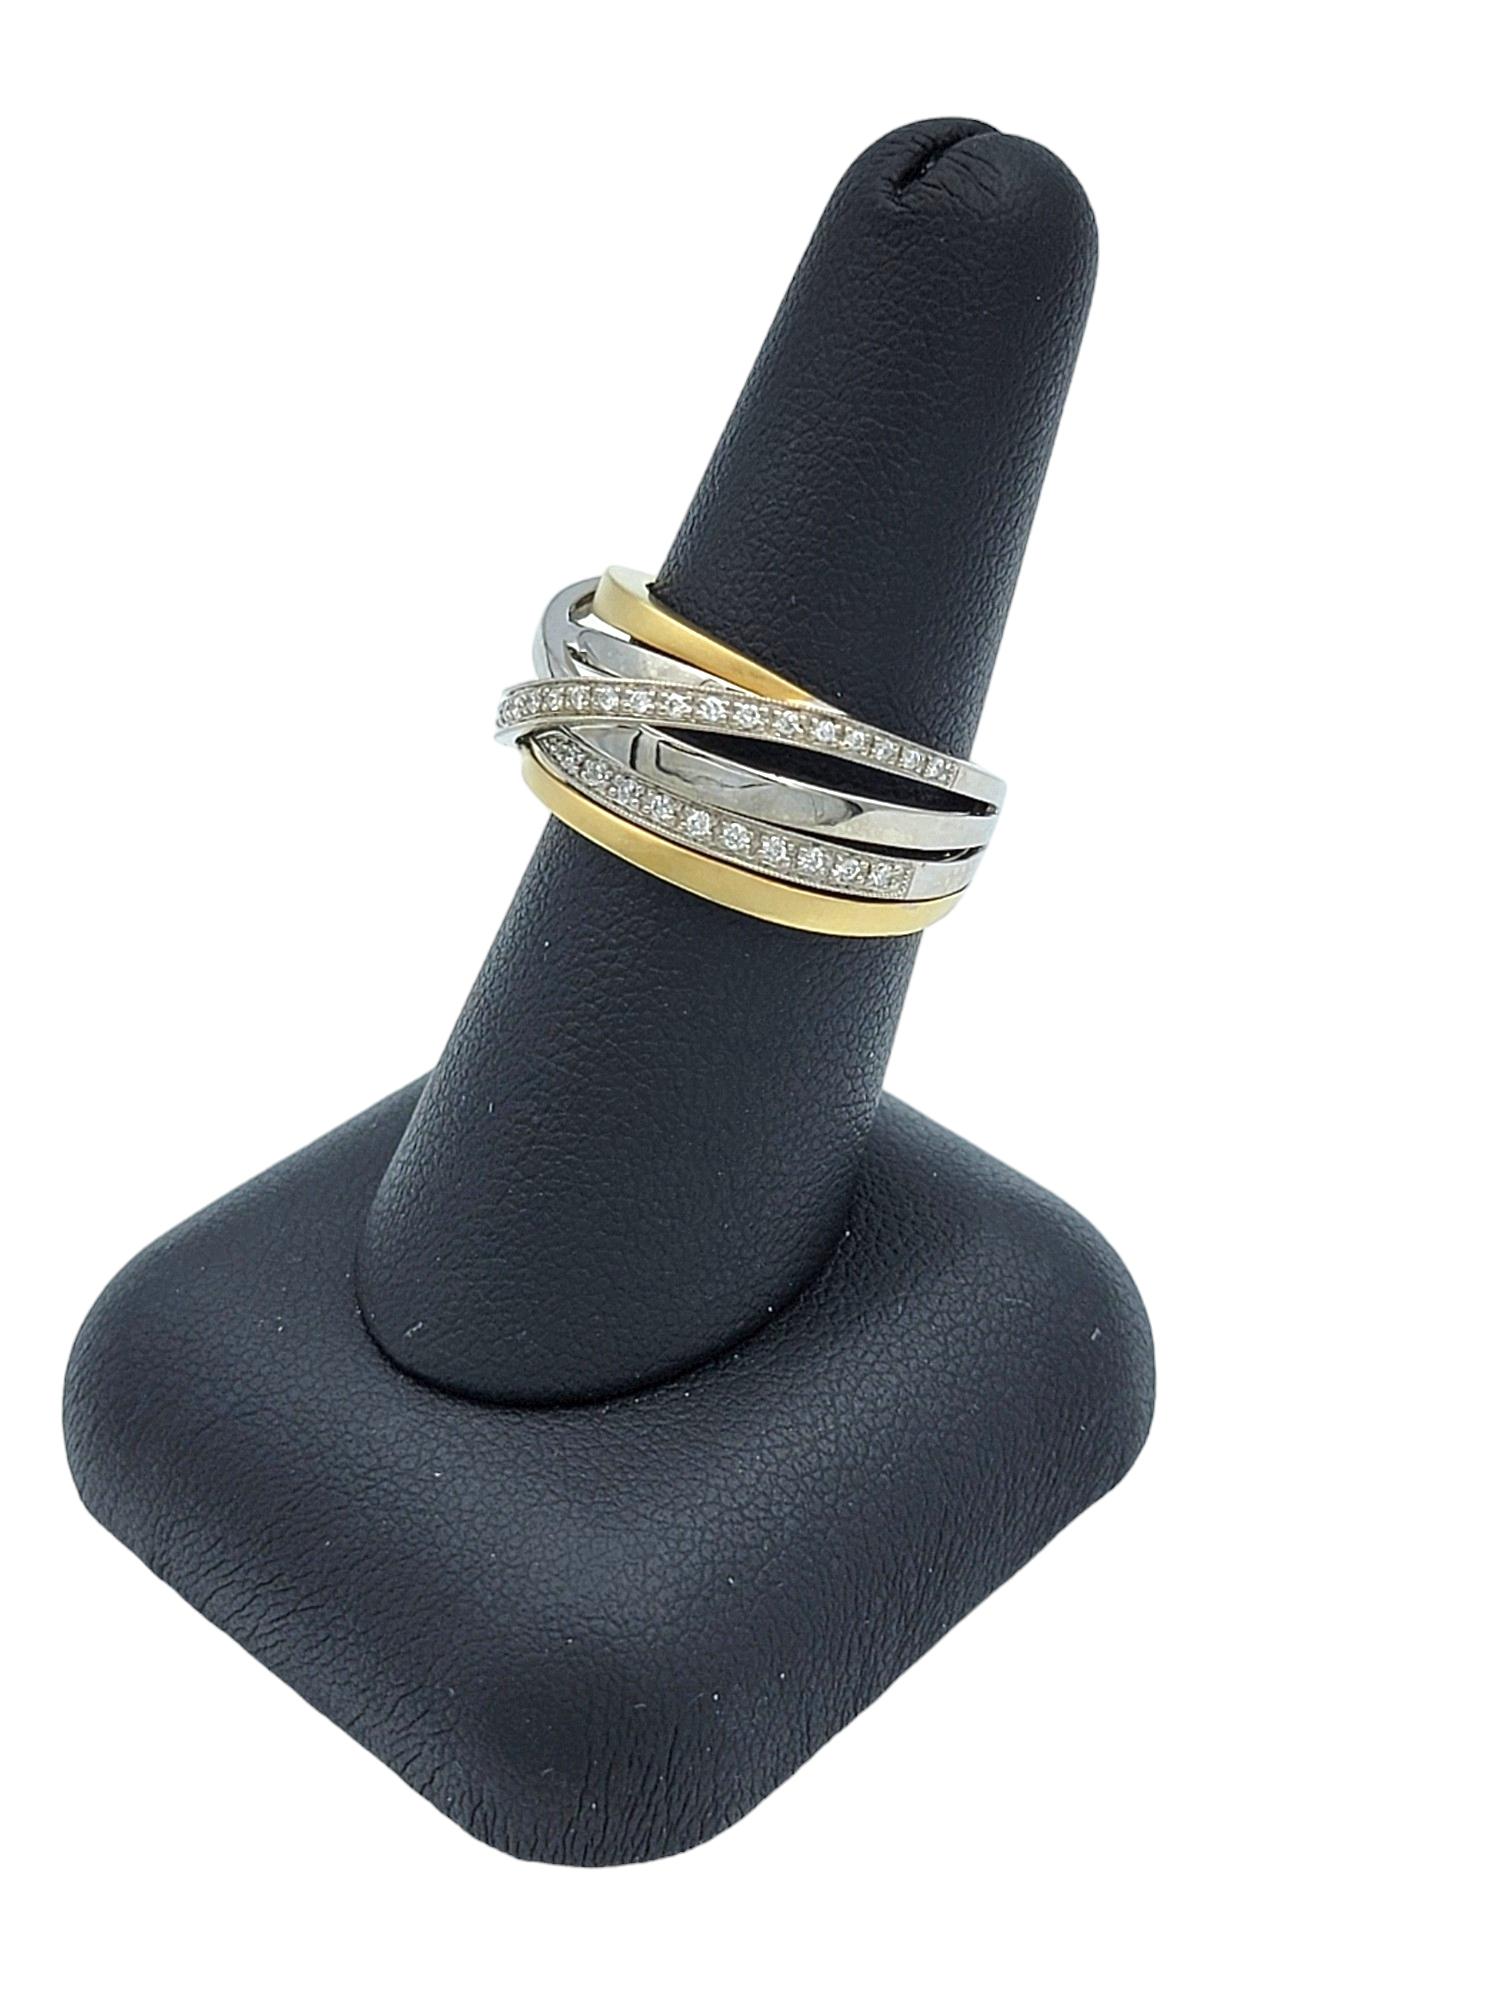 Two Tone 18 Karat Gold Criss-Cross Multi Row Band Ring with Diamonds For Sale 6